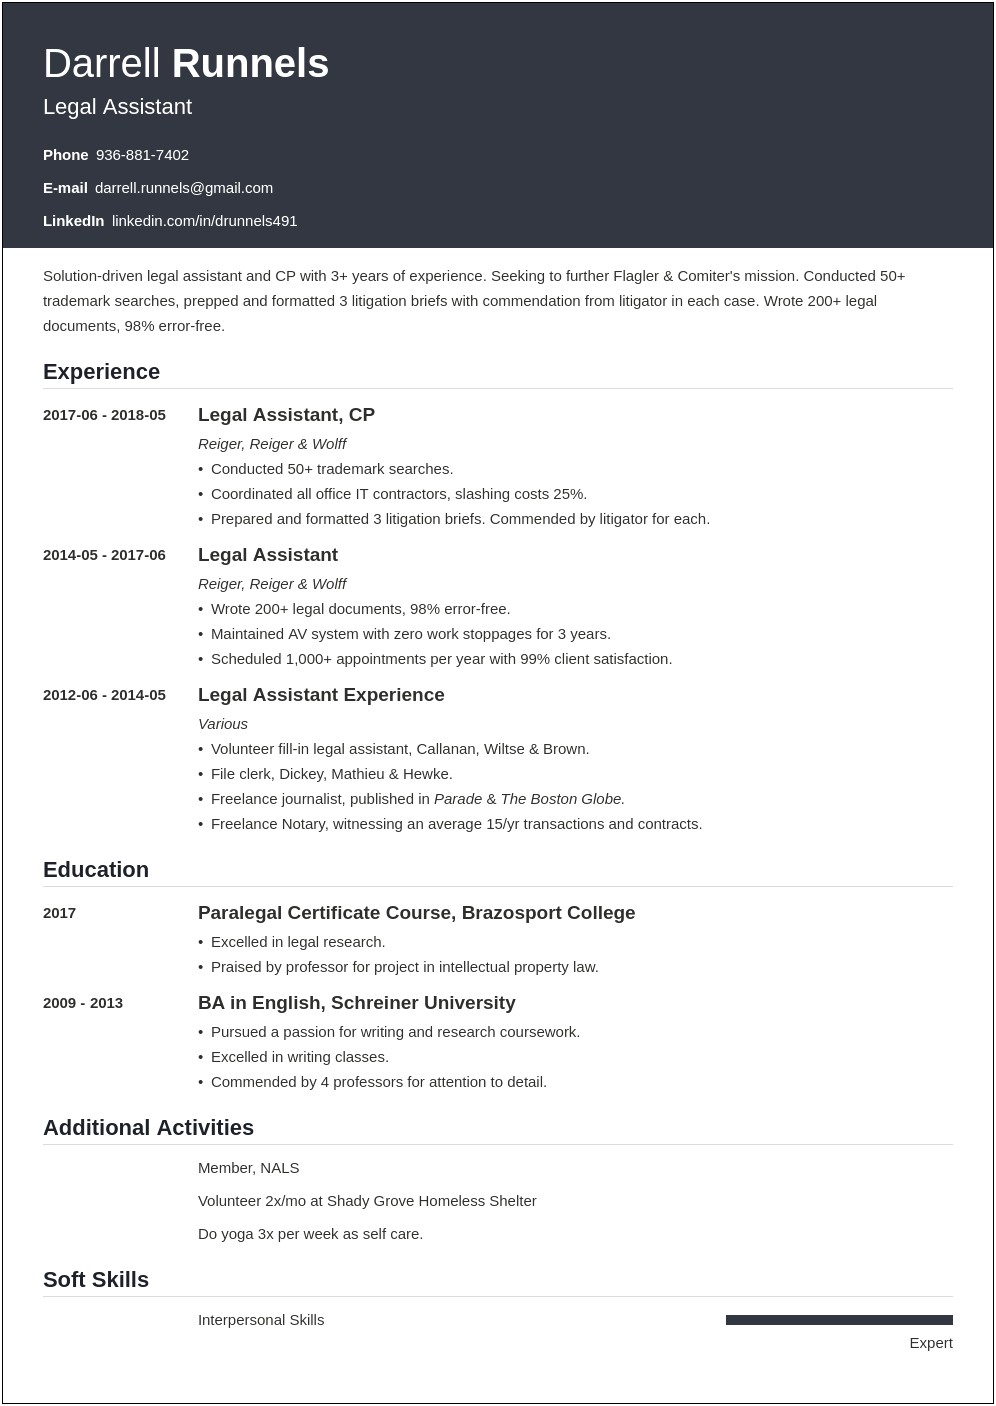 Skills To List On Resume For Legal Assistant